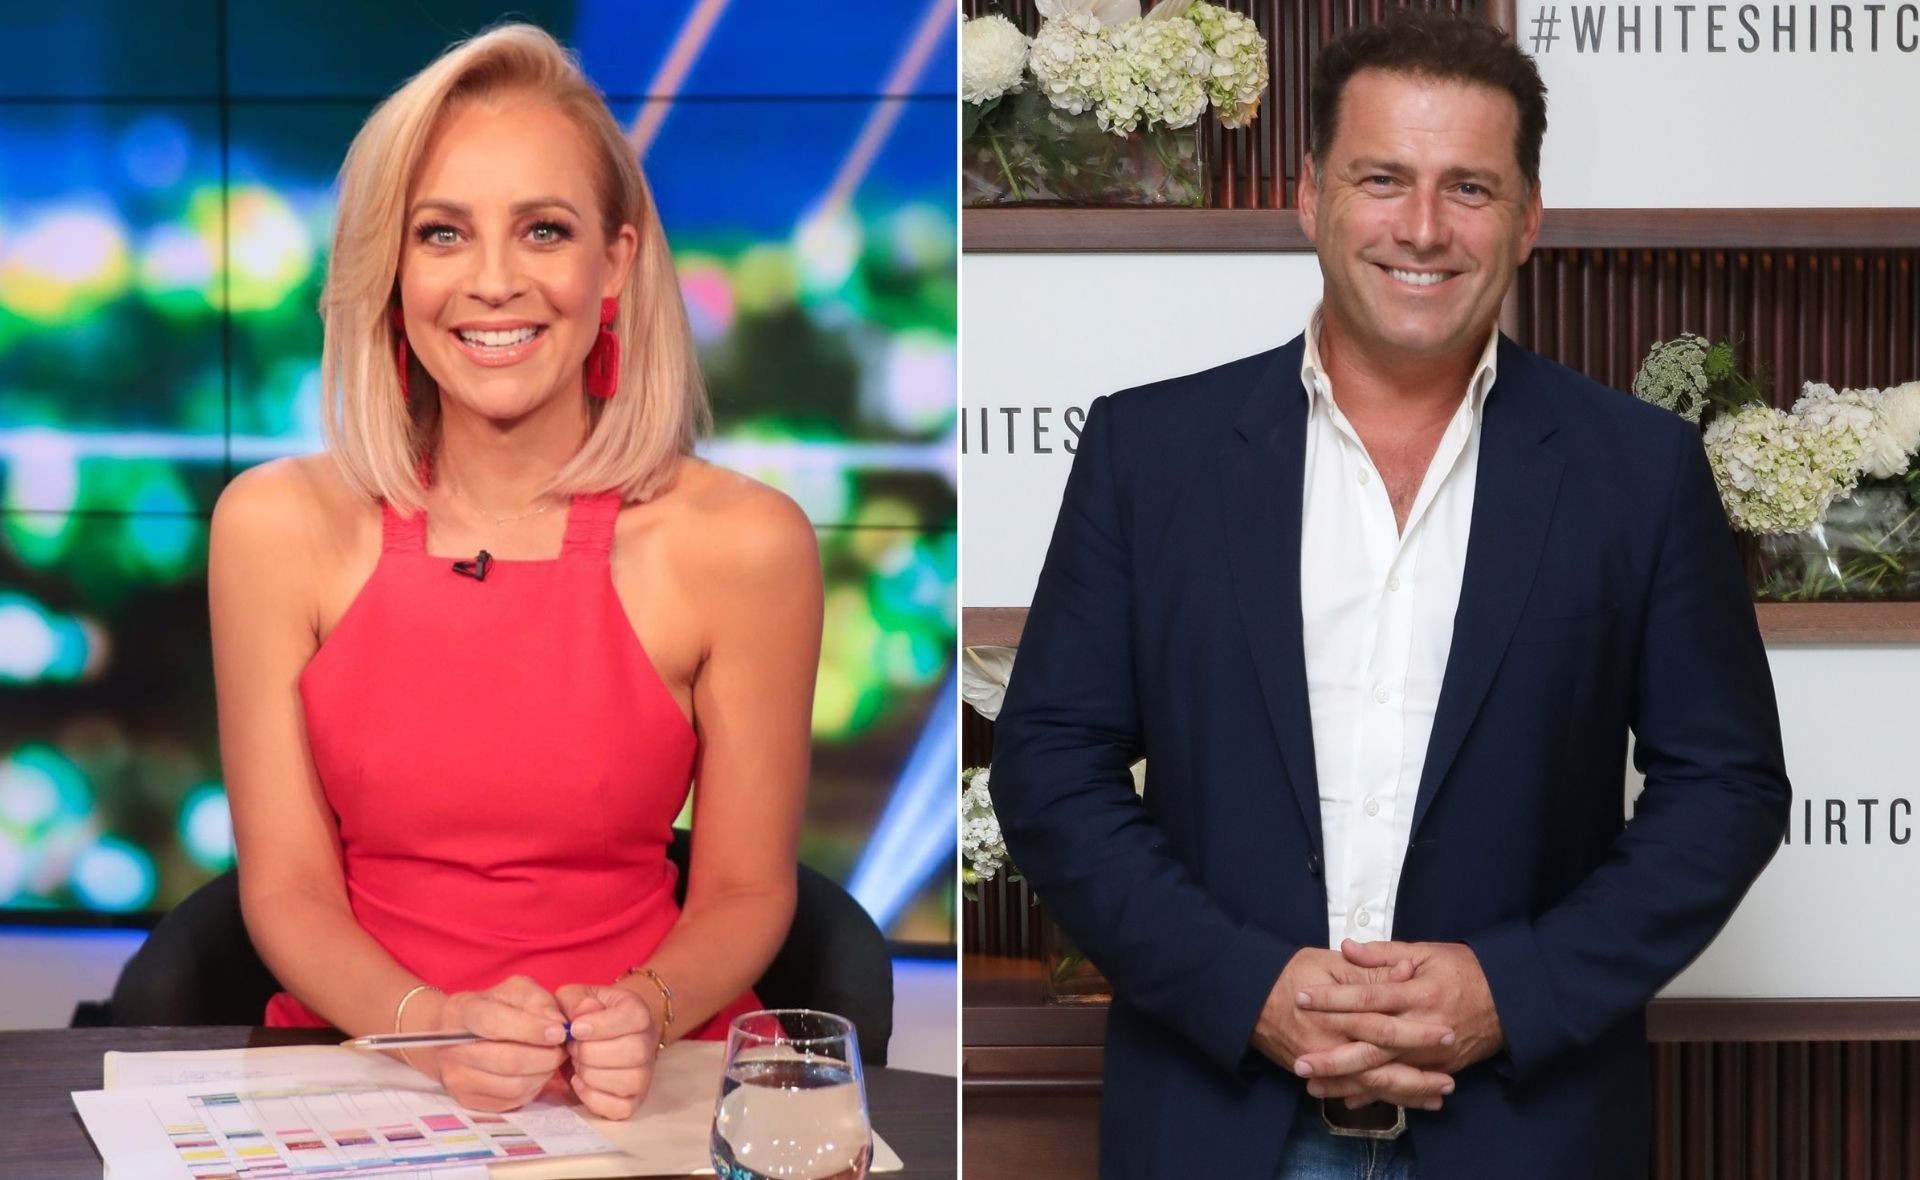 EXCLUSIVE: Karl Stefanovic and Carrie Bickmore’s secret TV deal is bad news for The Project fans